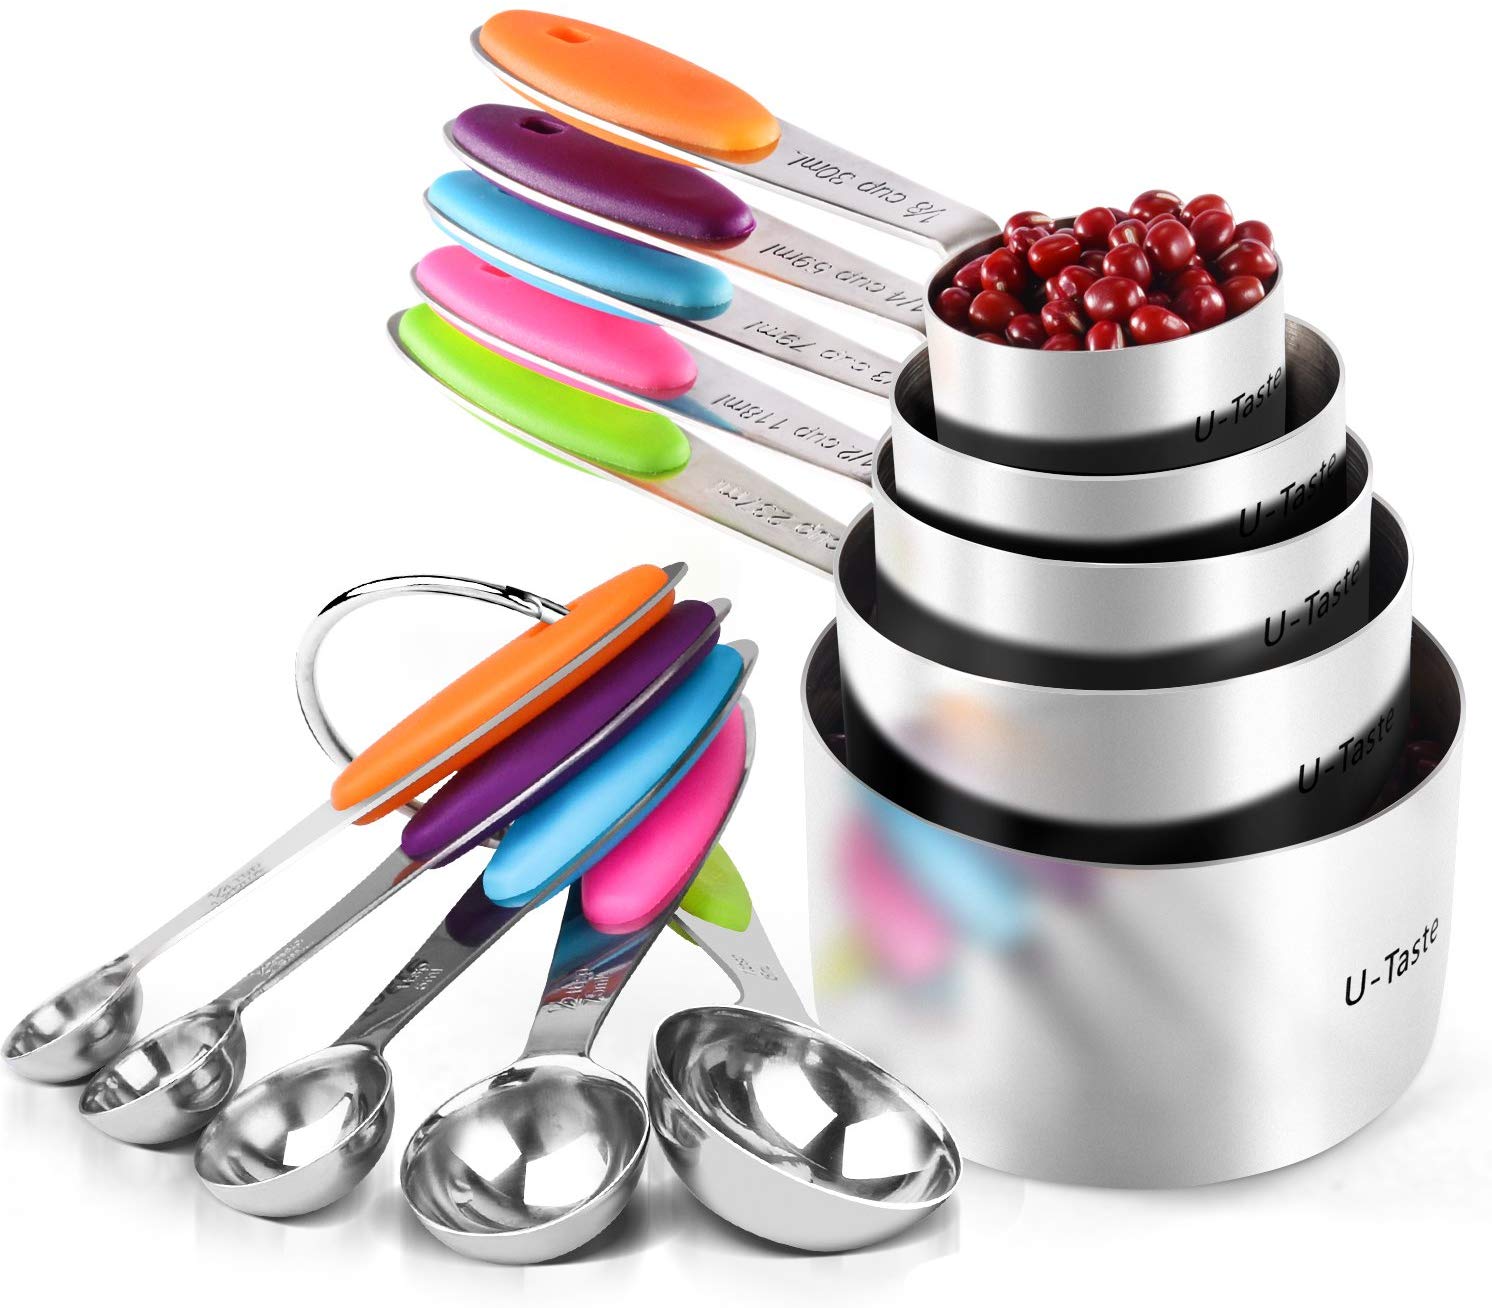 Heavy Duty Stainless Steel Metal Measuring Spoons (Set of 6 Including –  Spring Chef